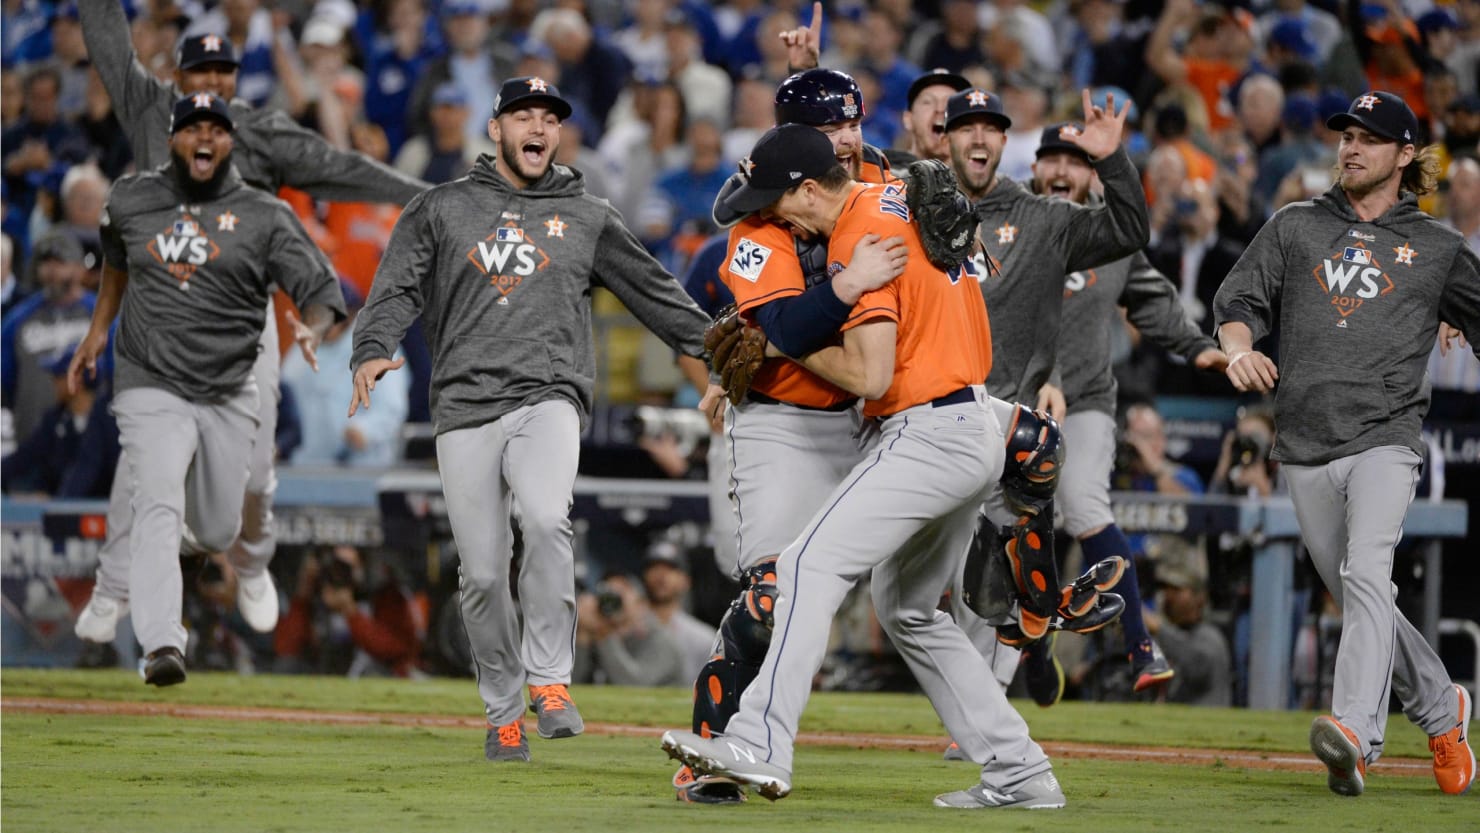 Astros Win First World Series Championship With Game 7 Victory Over Dodgers